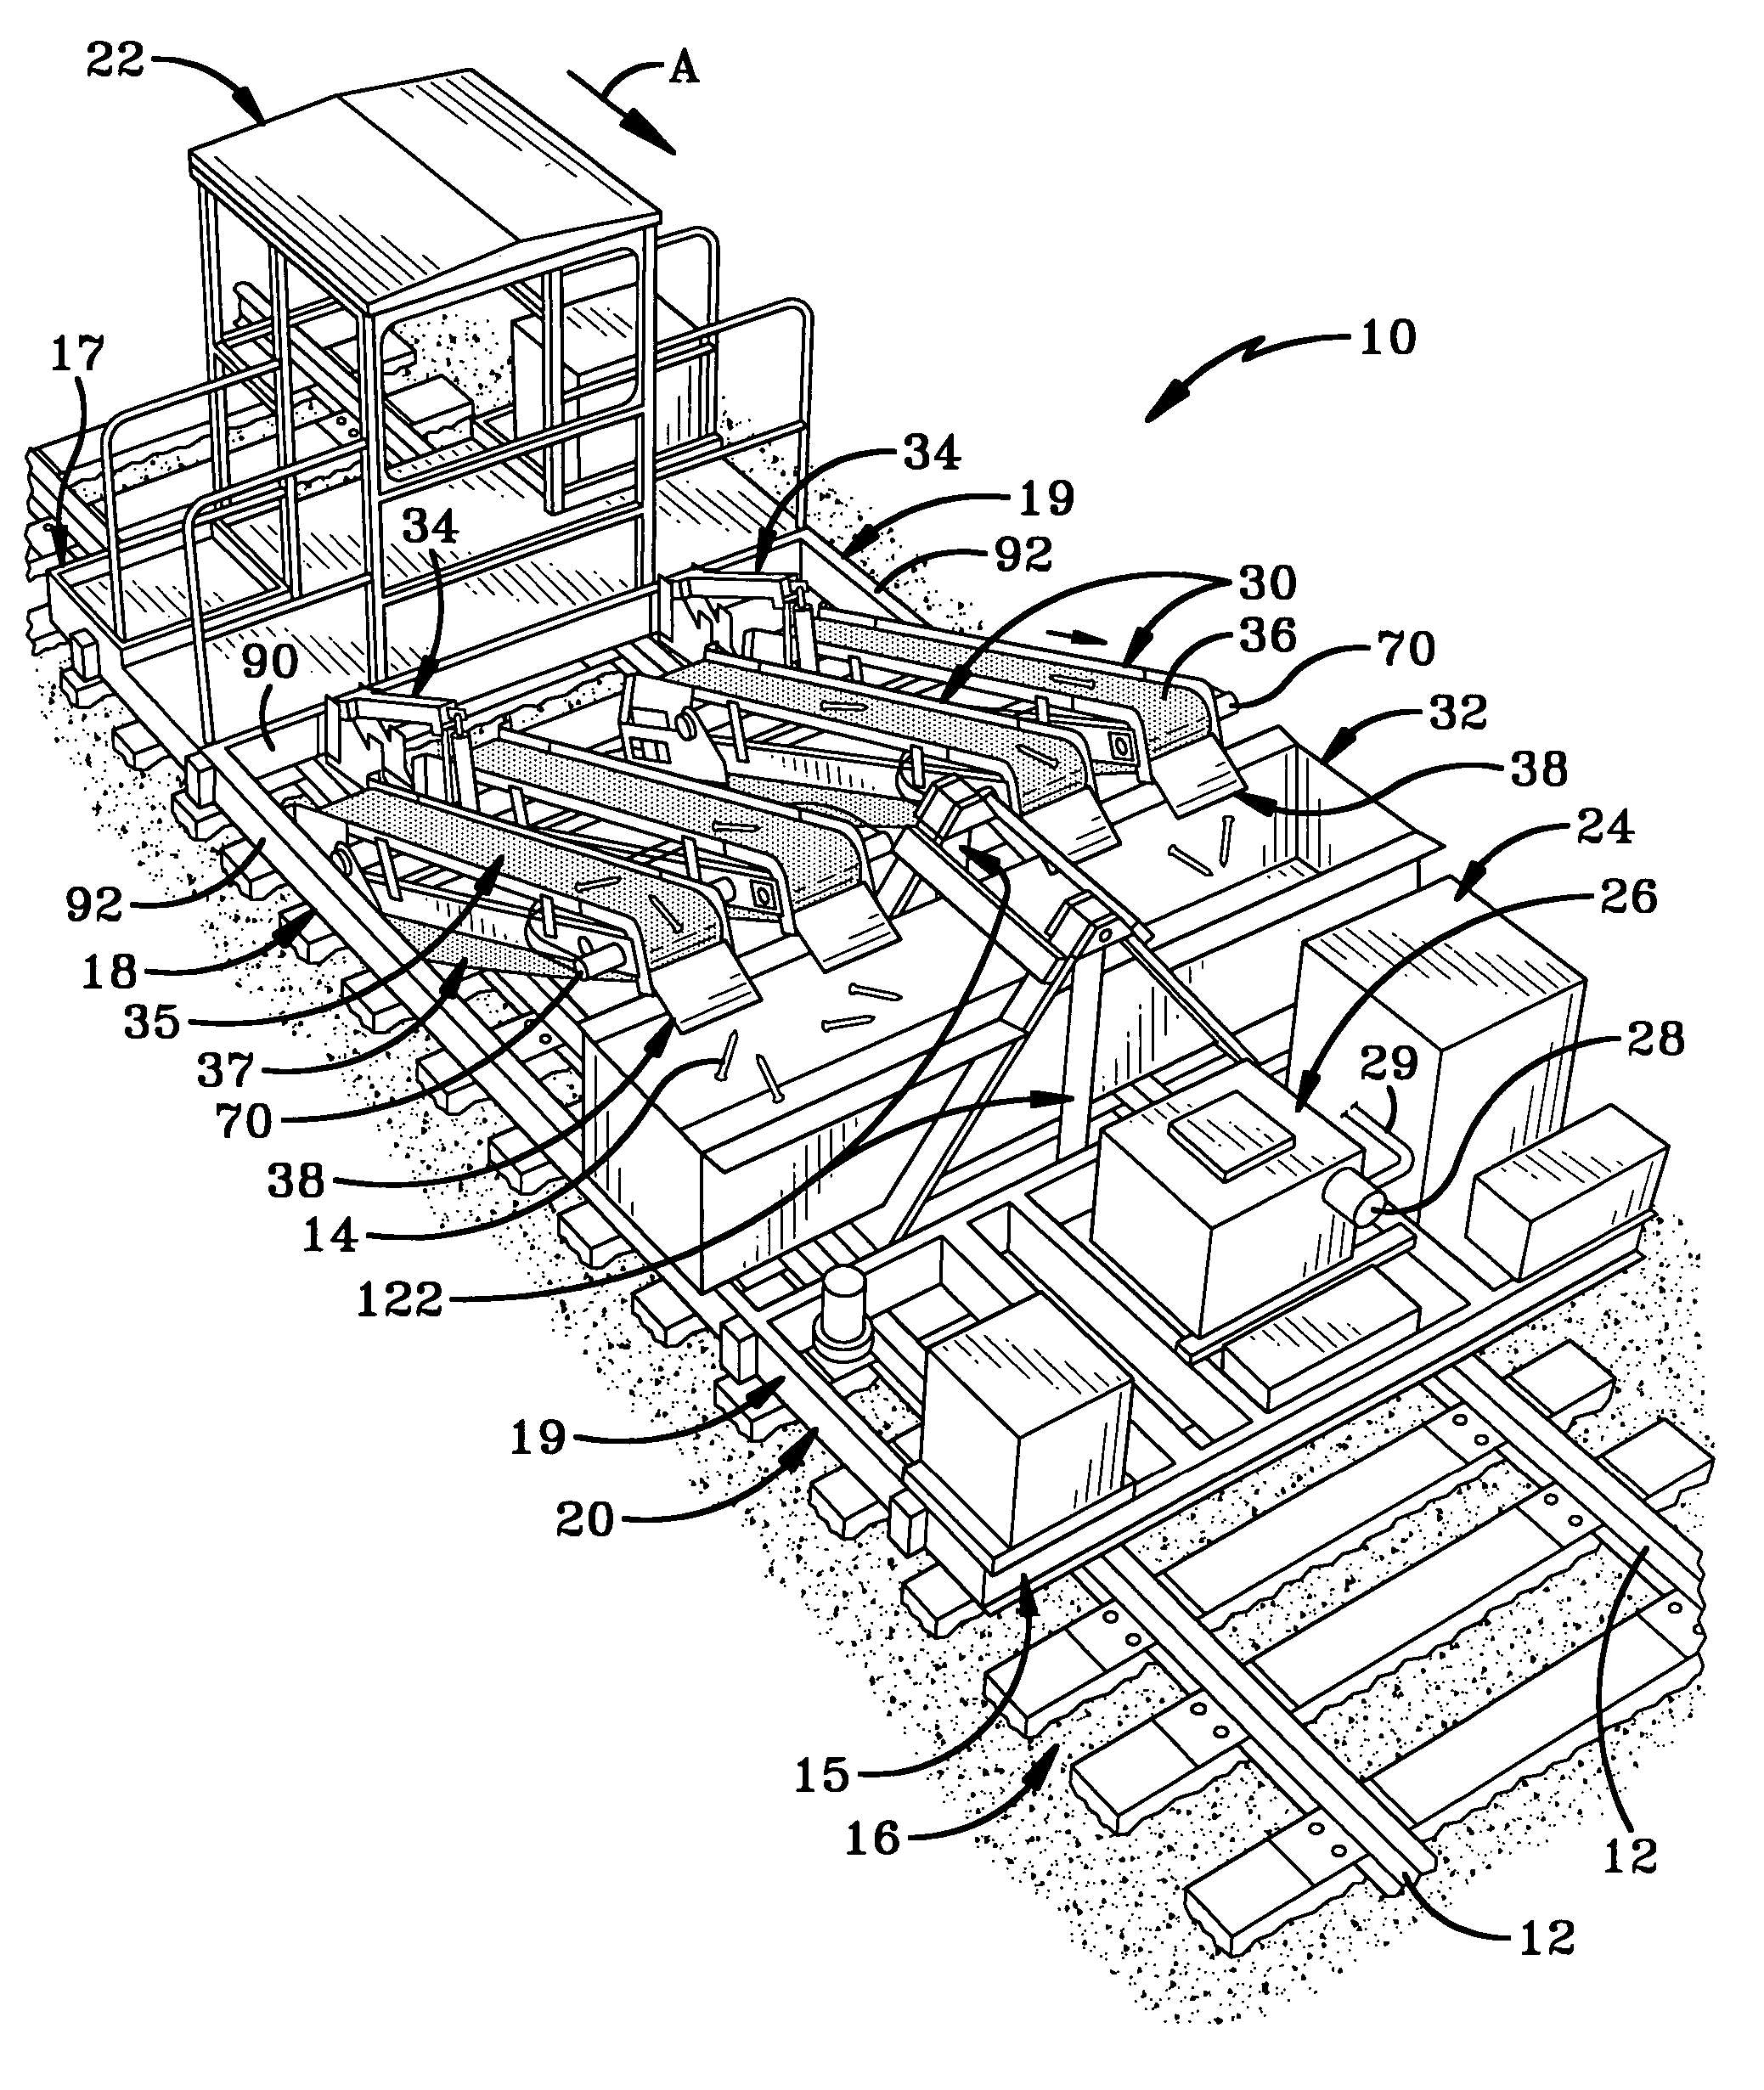 Device for removing metallic objects from a railway bed